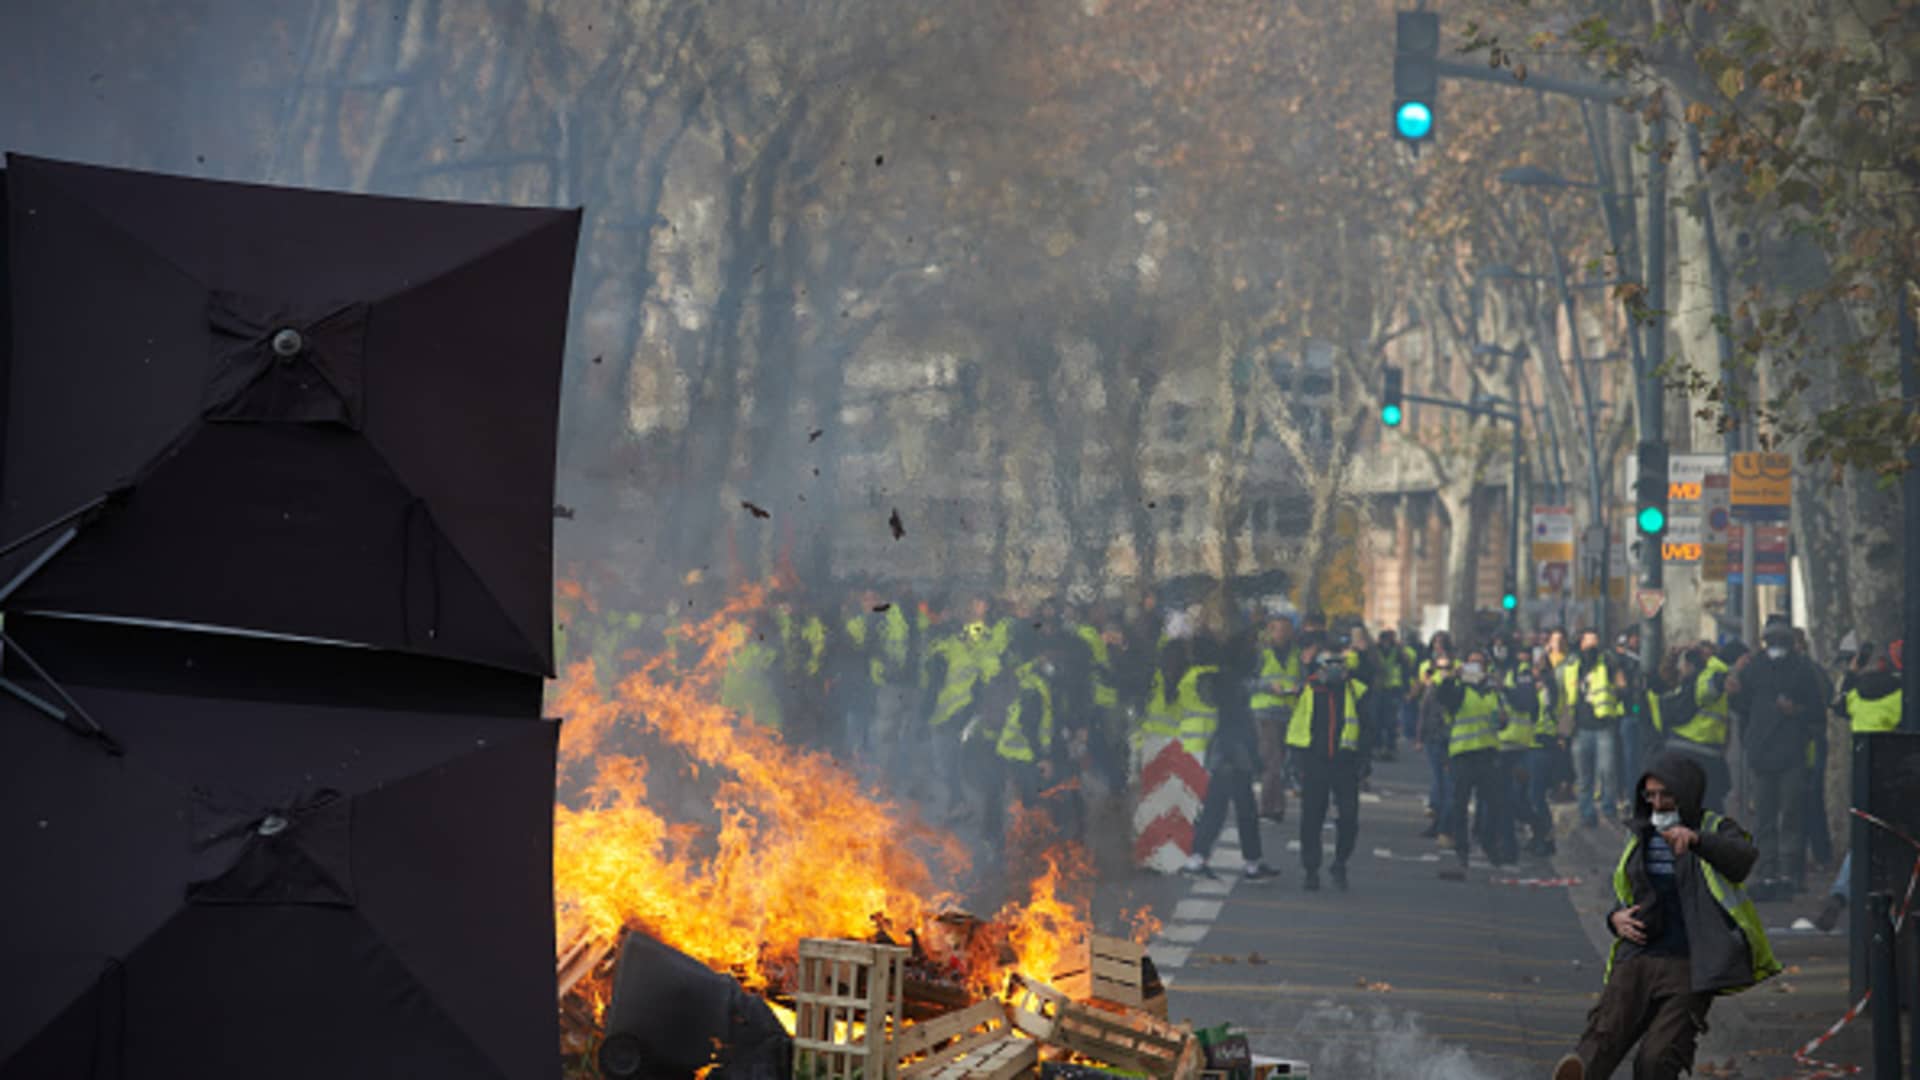 AIDS sector Mittens France fuel protests: Here's what's happening and why it matters